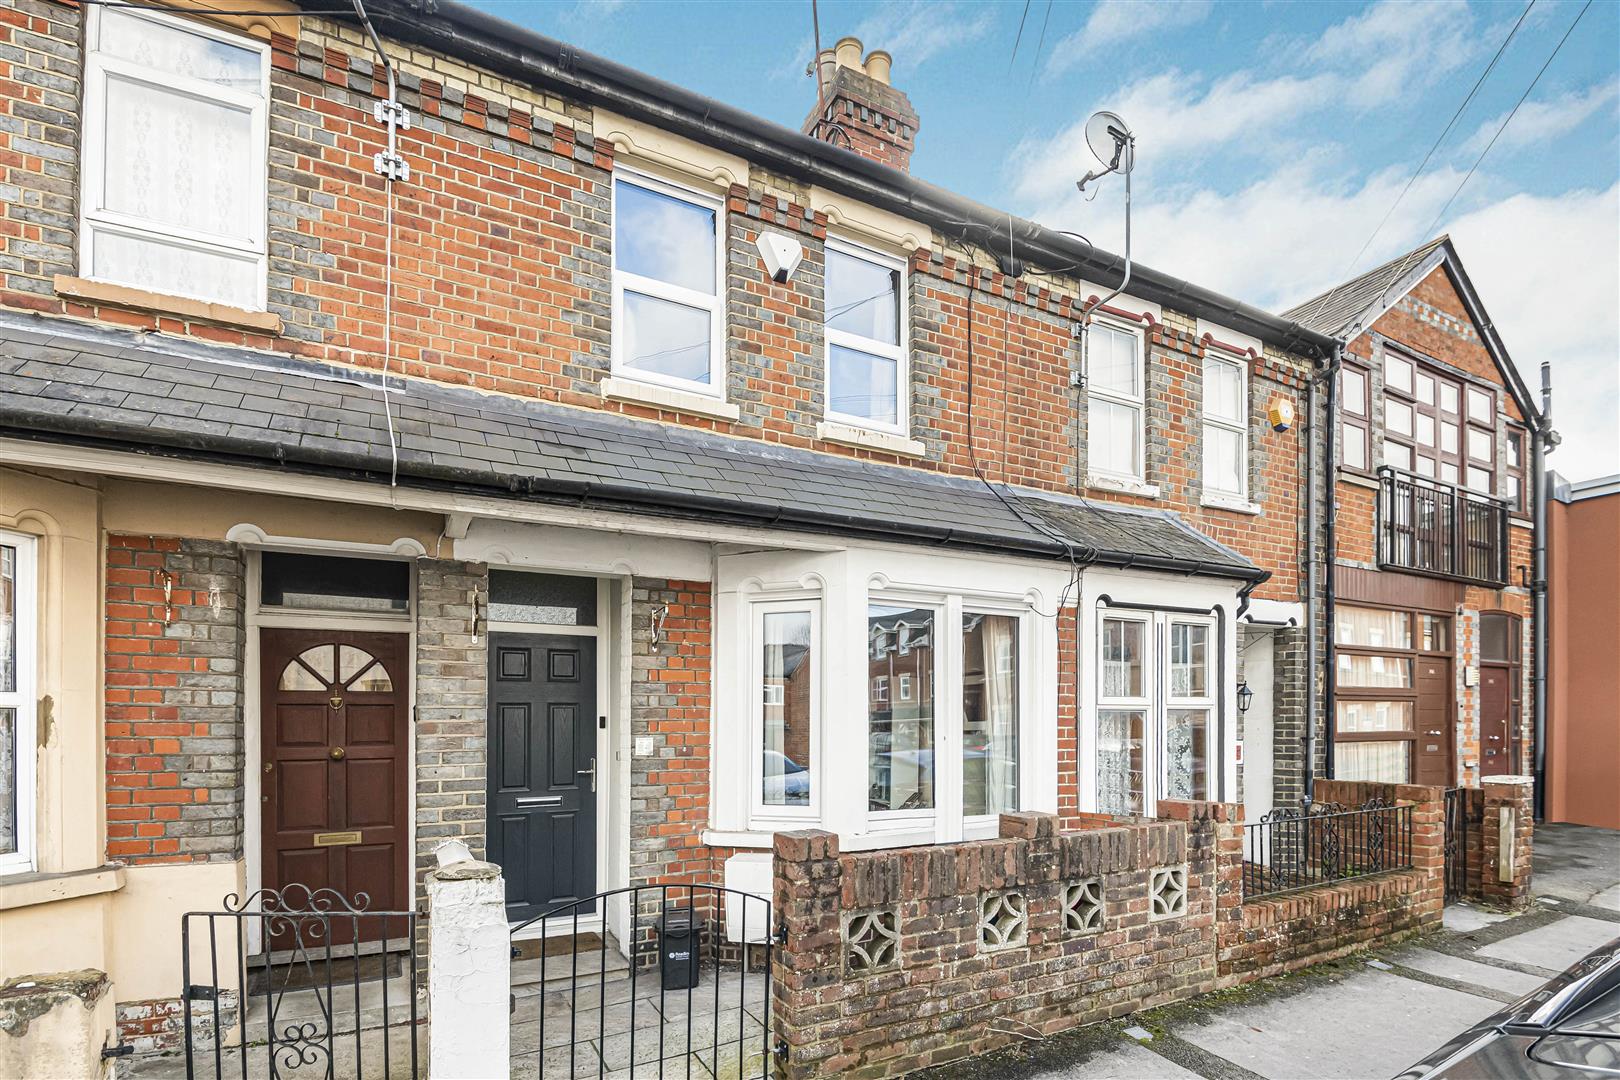 York Road Reading house for sale in Reading